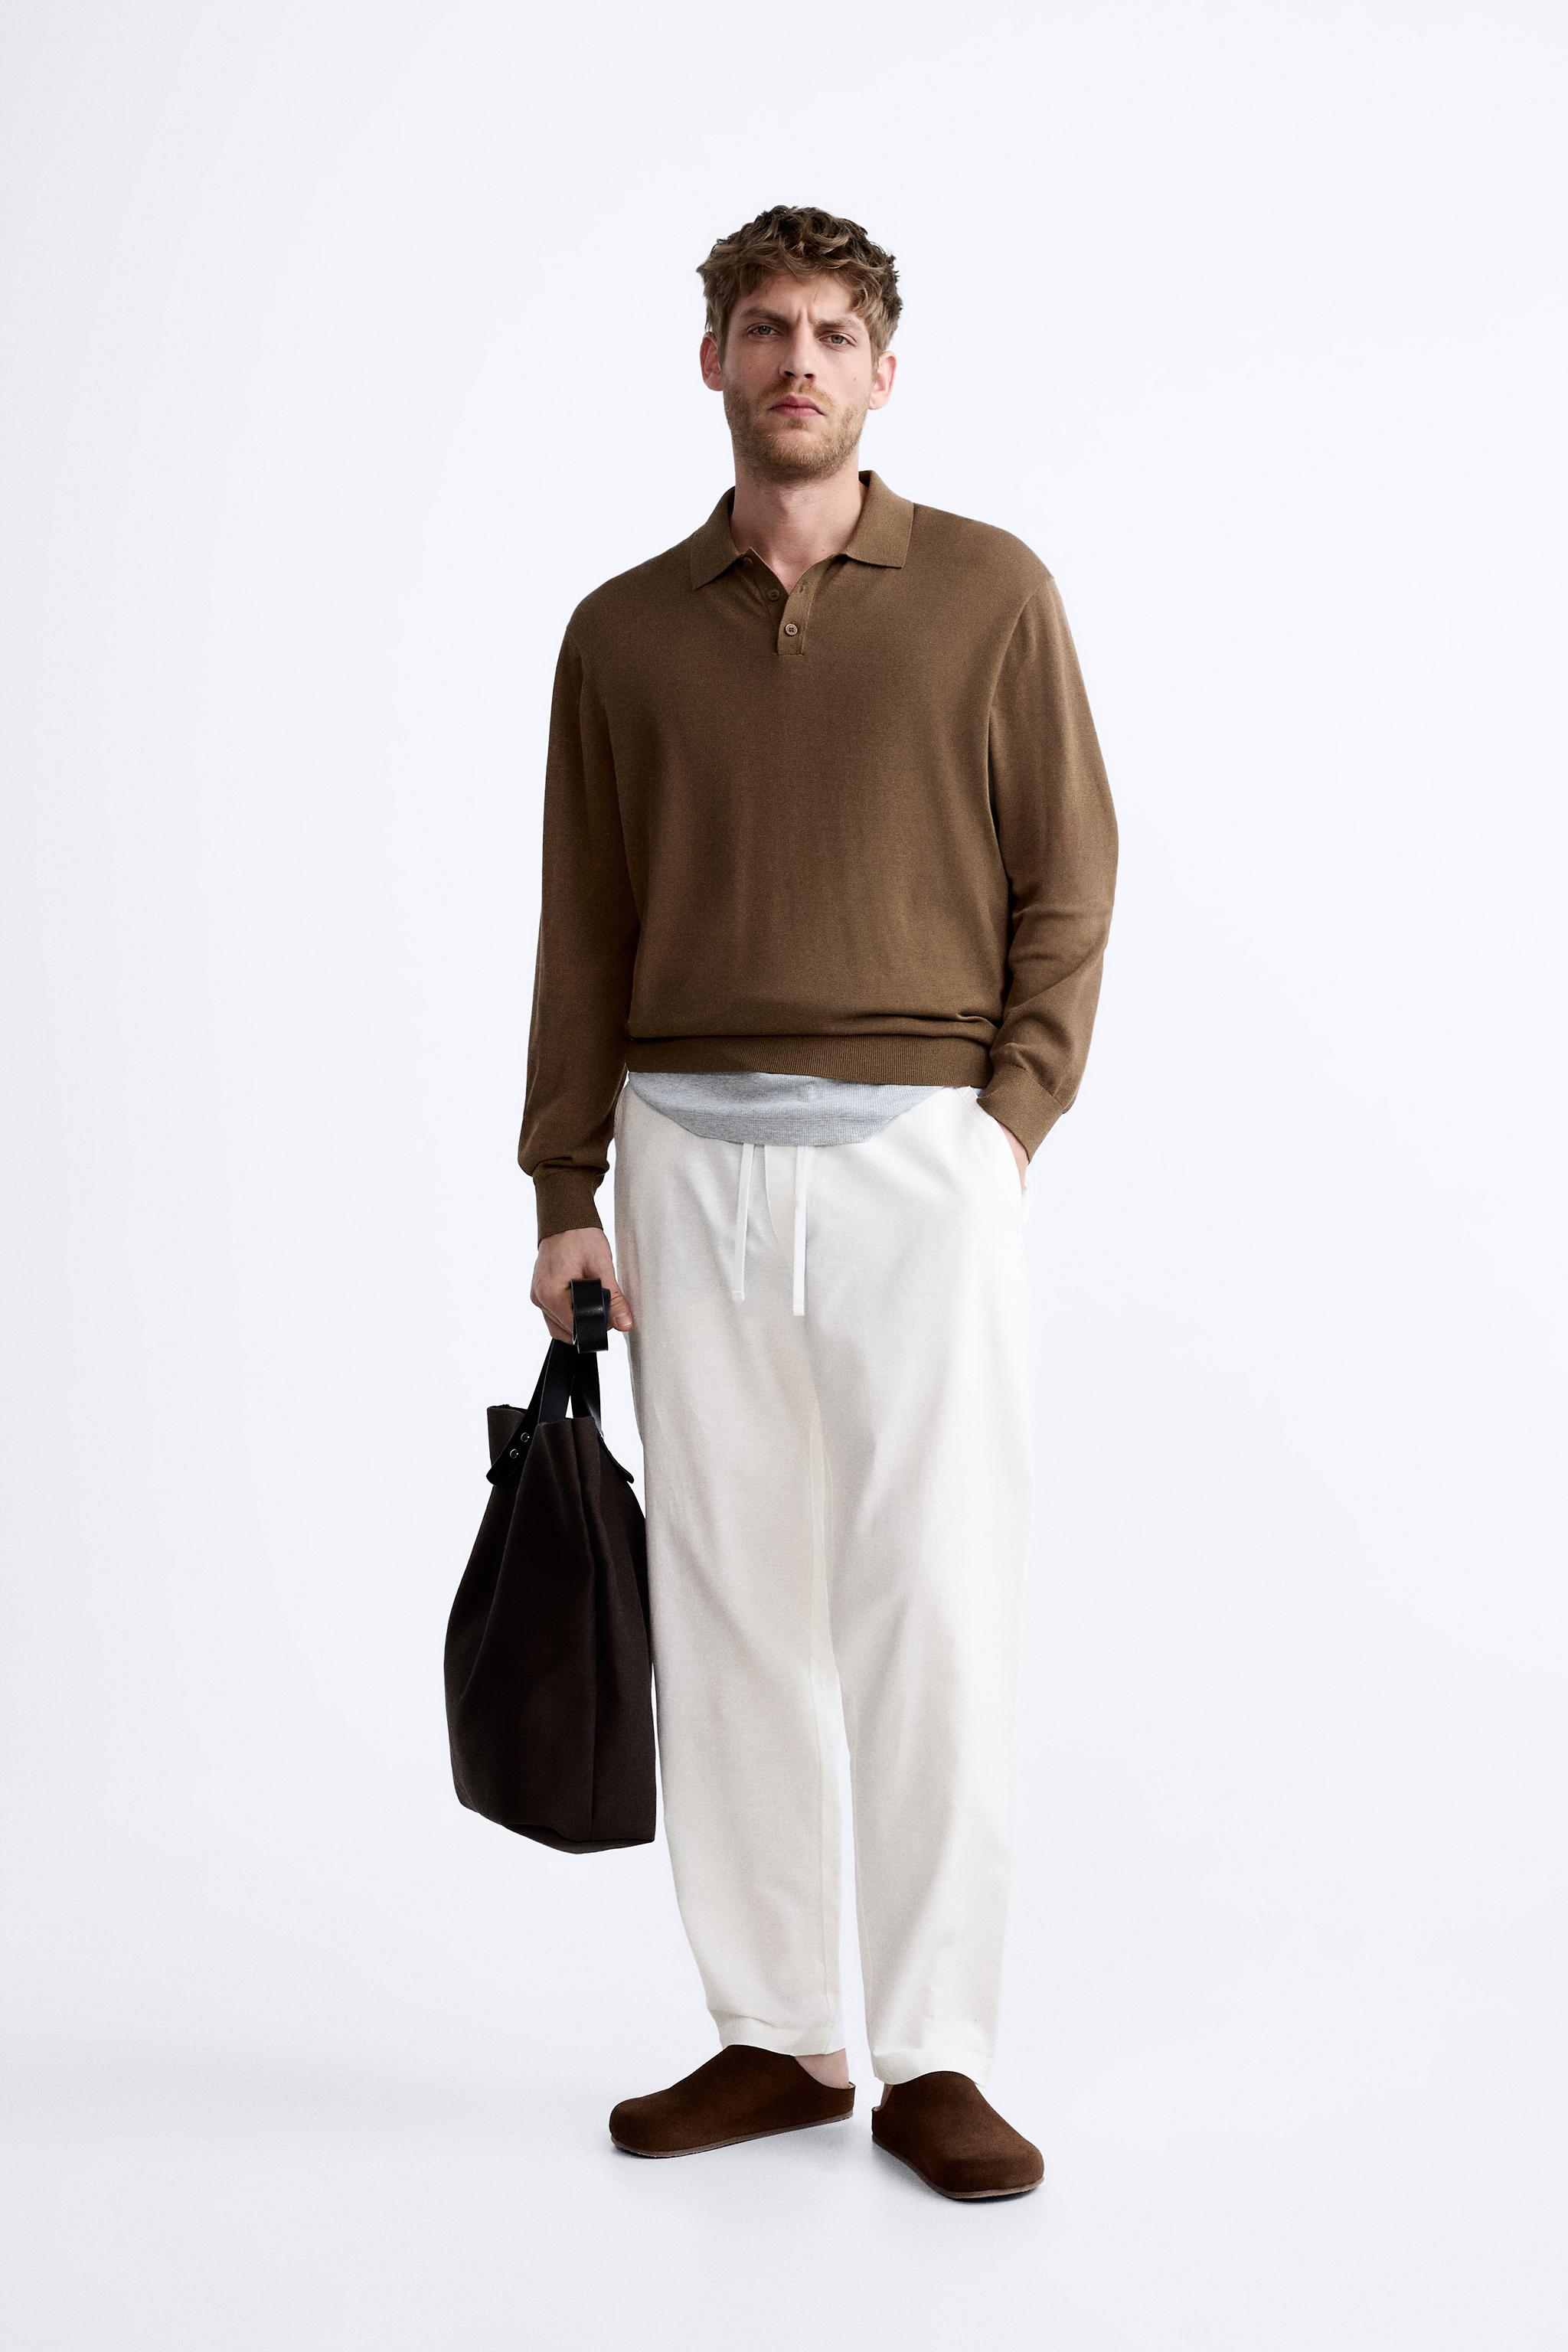 Casual Men Zara Narrow Fit Cotton Trousers at Rs 435/piece(s) in